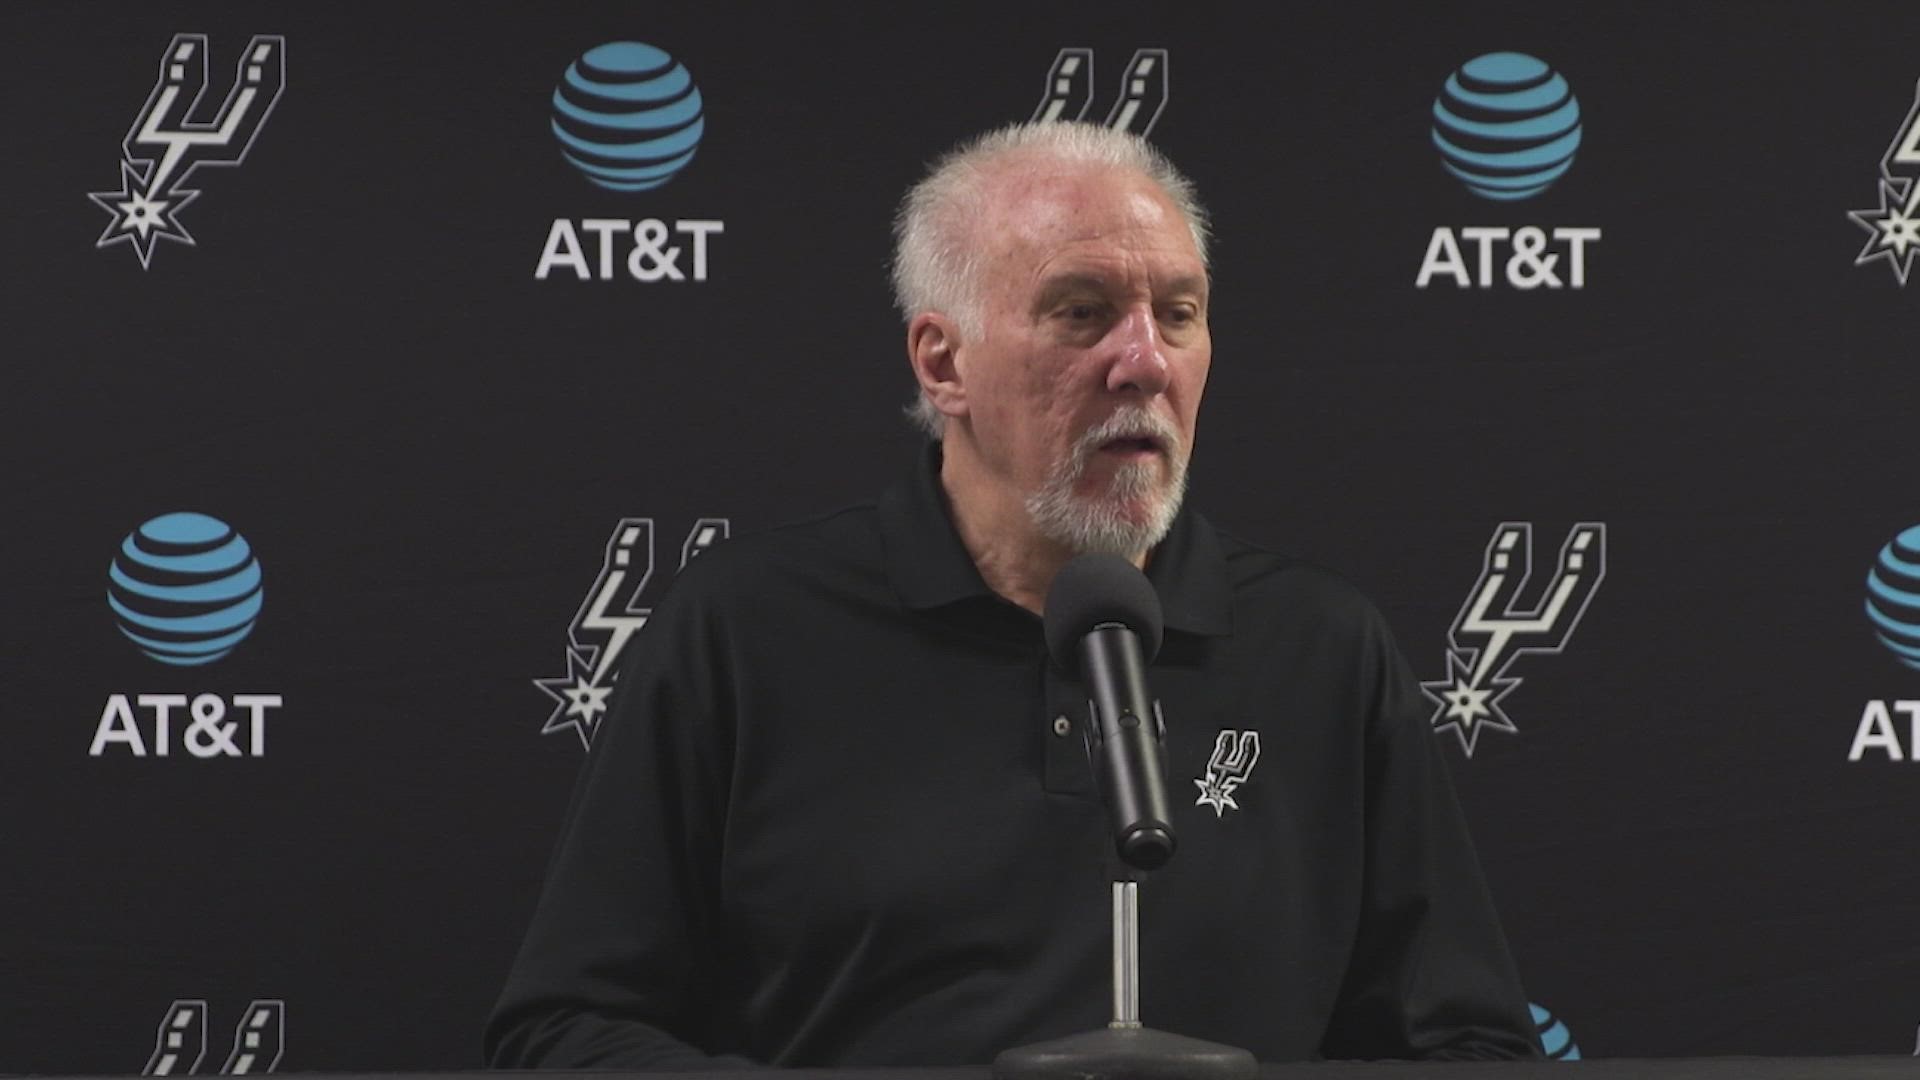 "He's been important the whole year, you hate to lose him here down the stretch when we're in the position that we're in," Popovich said.